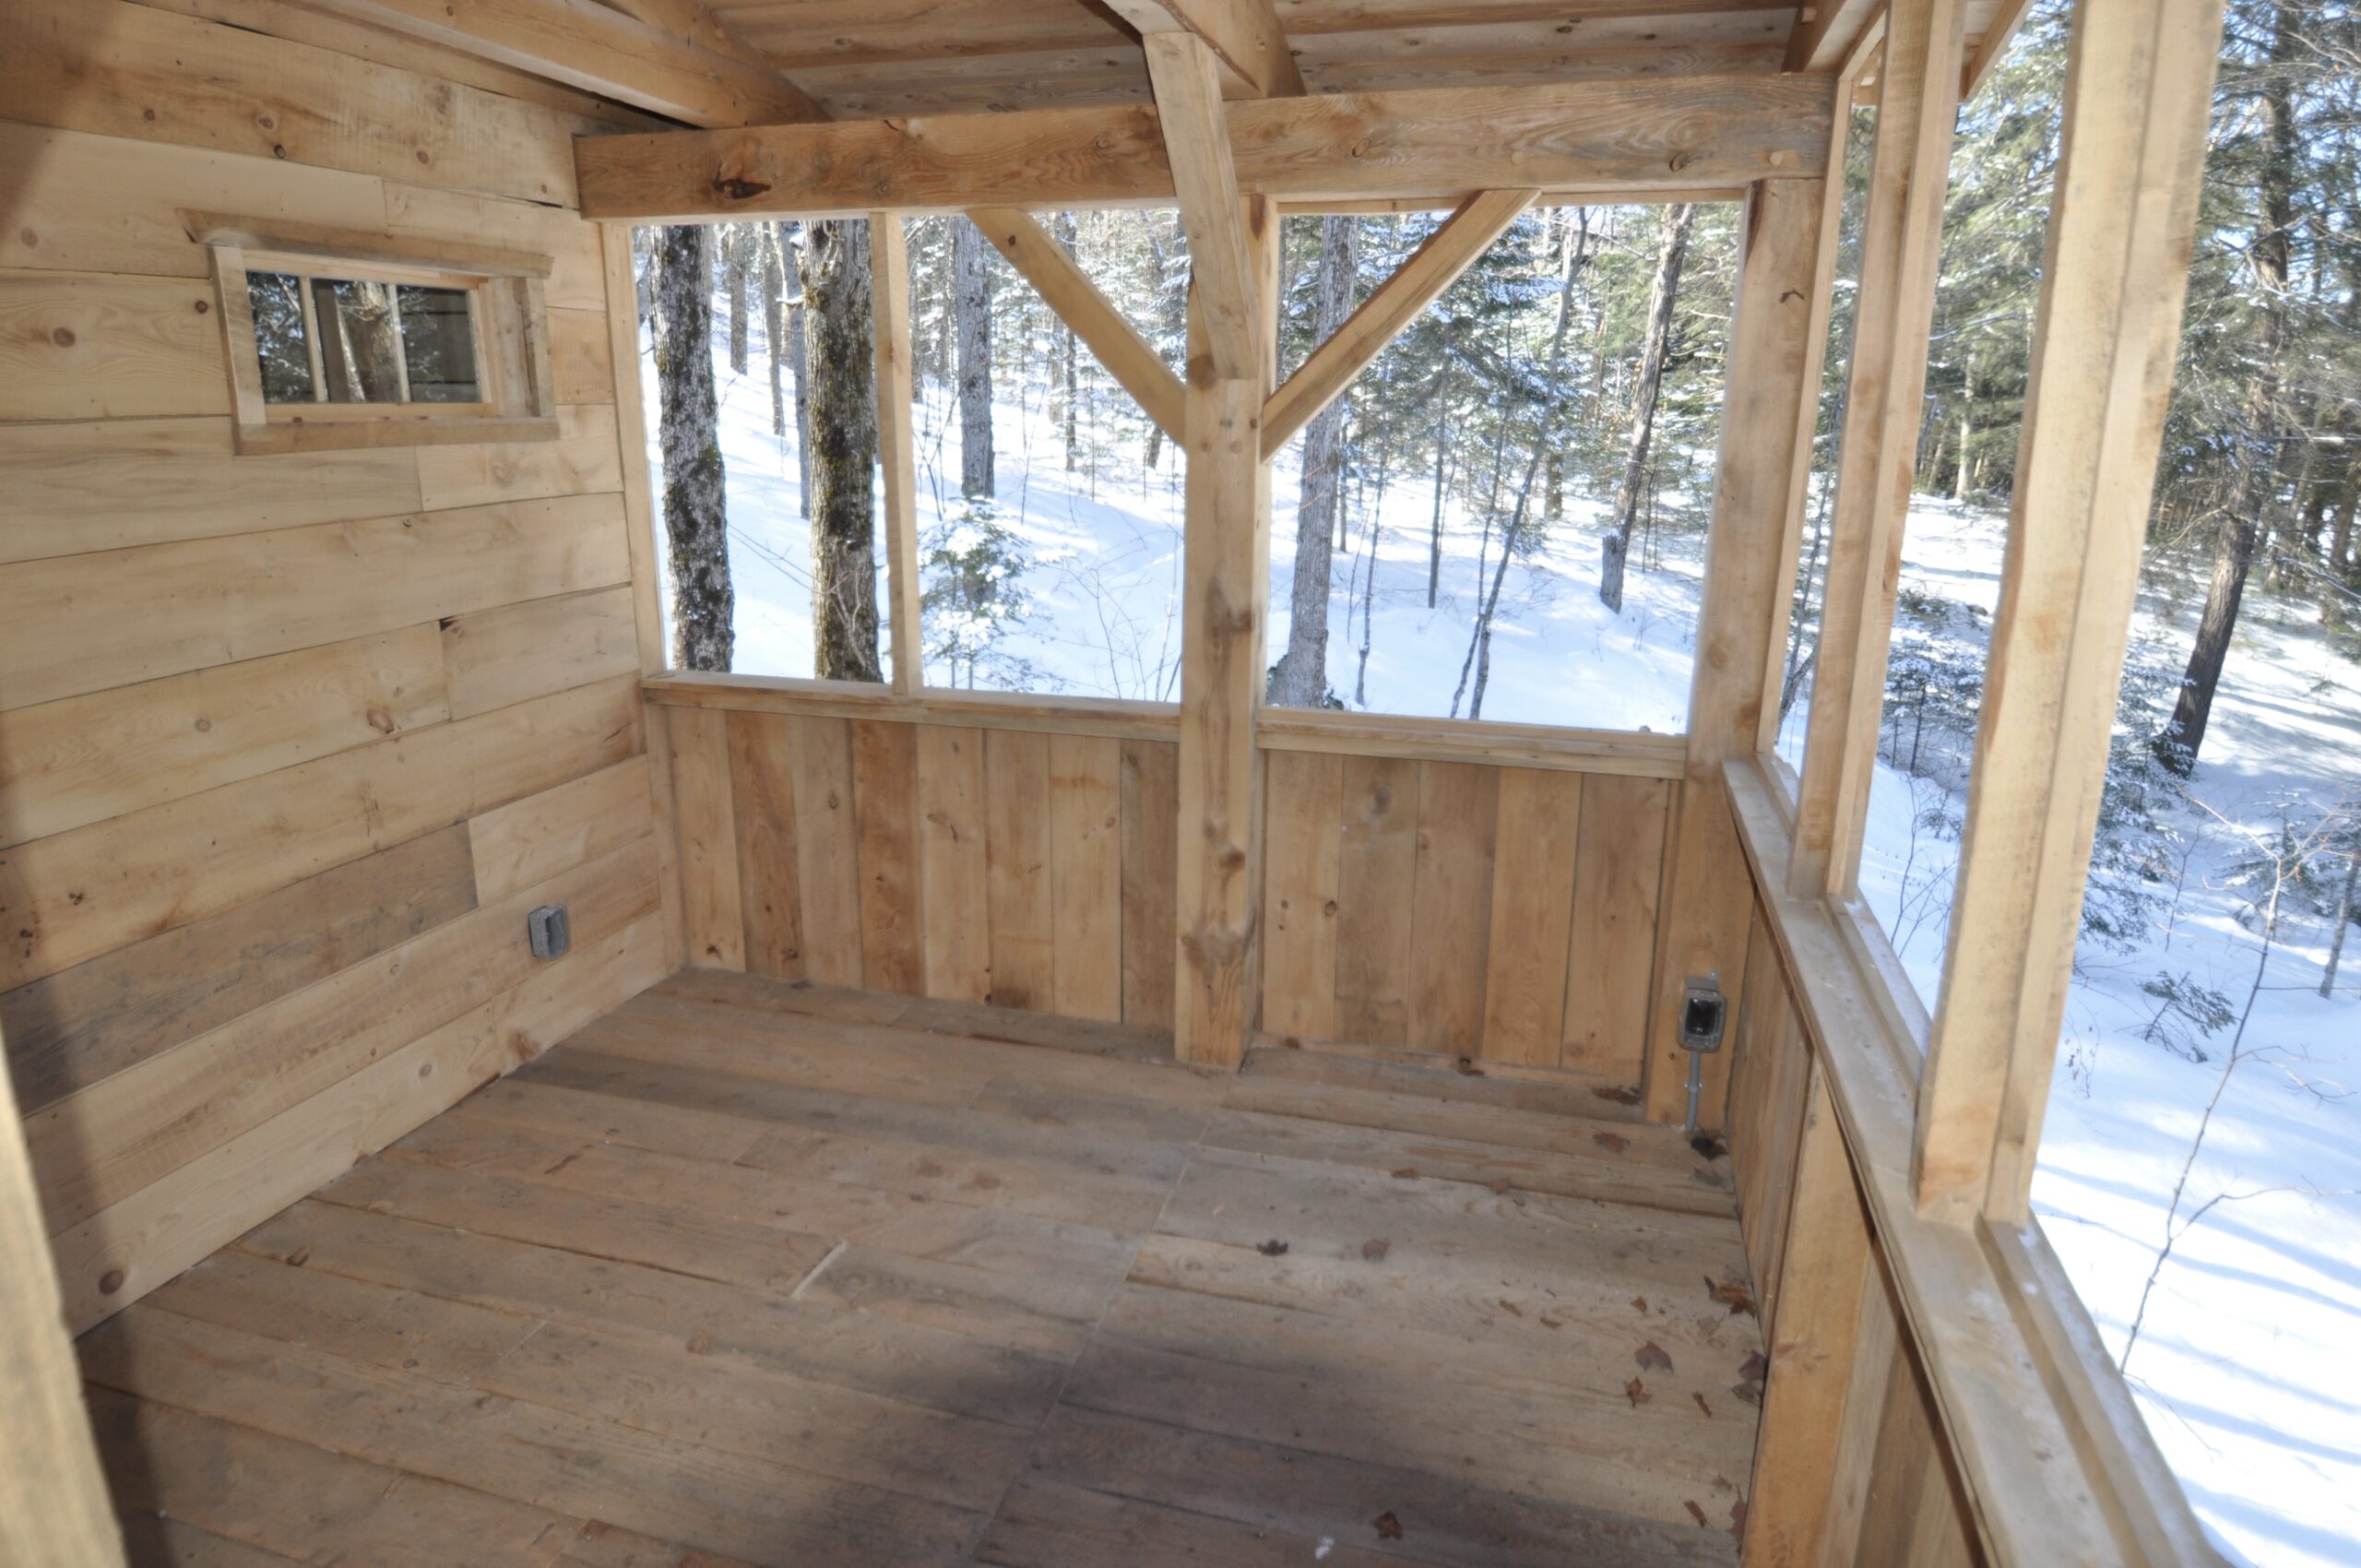 Interior of a spacious screened-in porch on a wooden cabin.